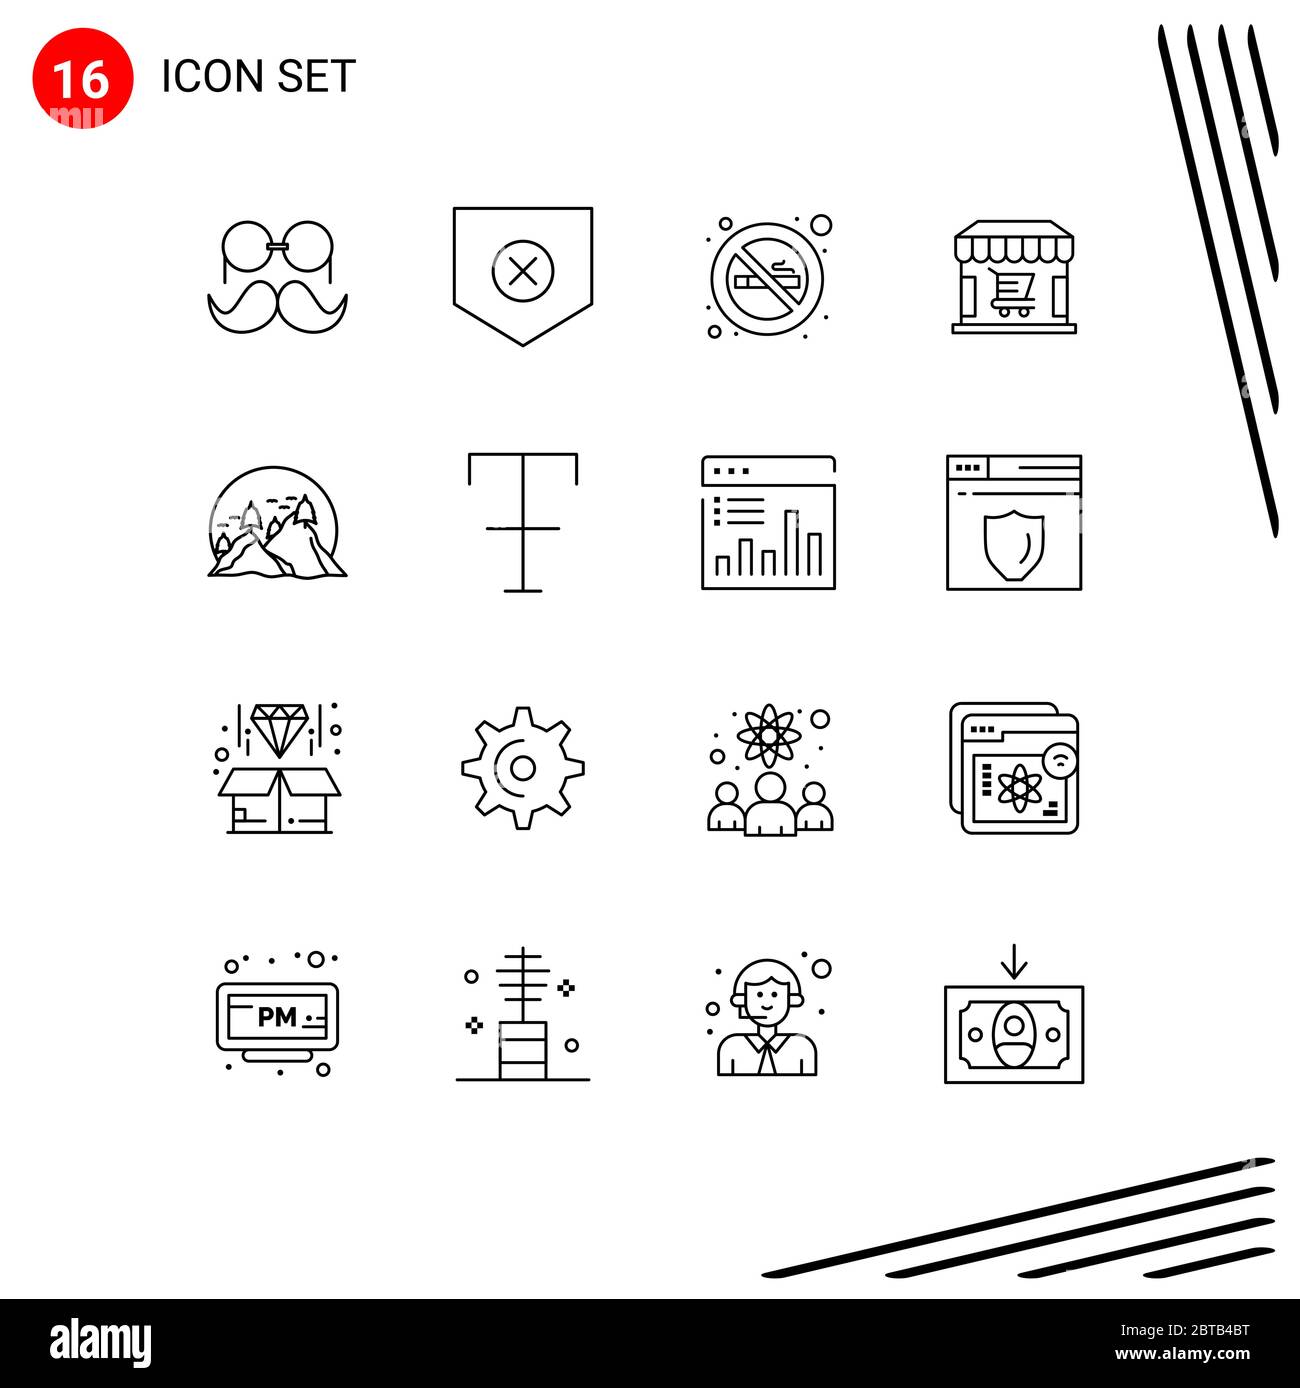 Mobile Interface Outline Set of 16 Pictograms of landscape, store, x, shopping, ecommerce Editable Vector Design Elements Stock Vector